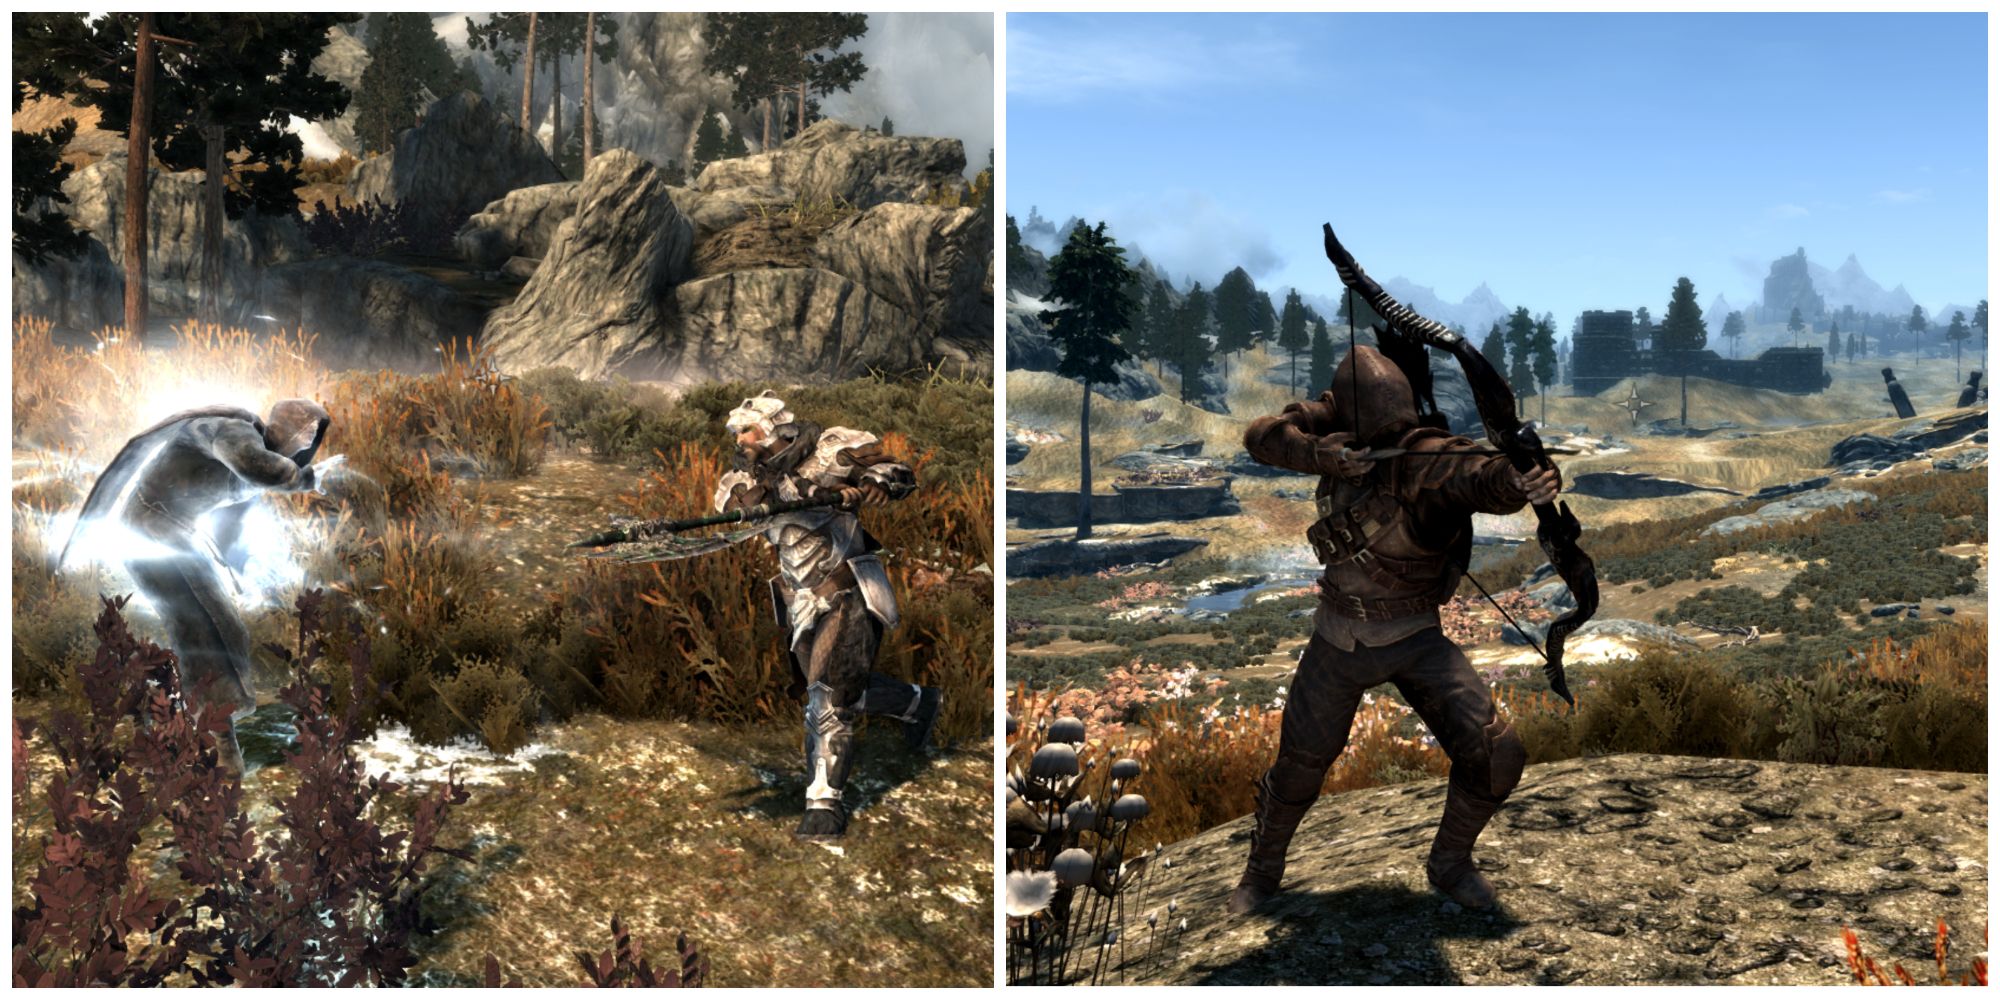 Skyrim Warrior and Sneaky Archer Builds for Best Skill Perks